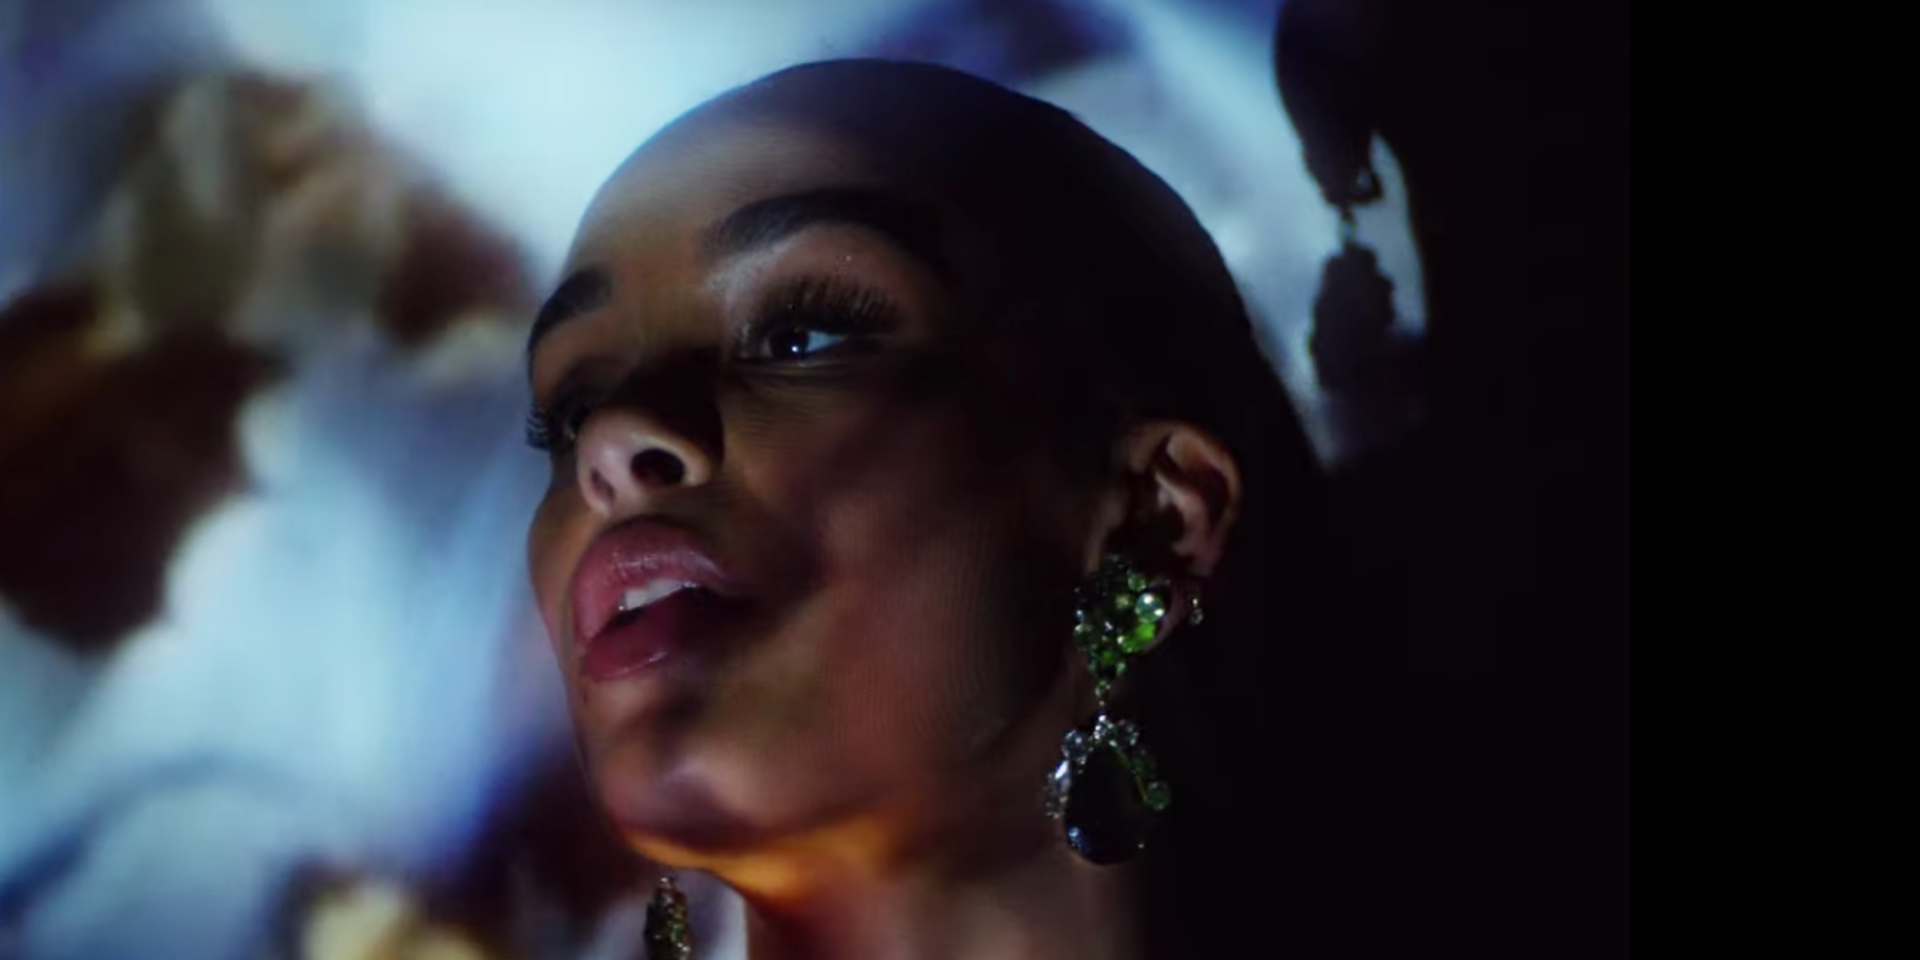 Jorja Smith releases poignant music video for 'Goodbyes' – watch